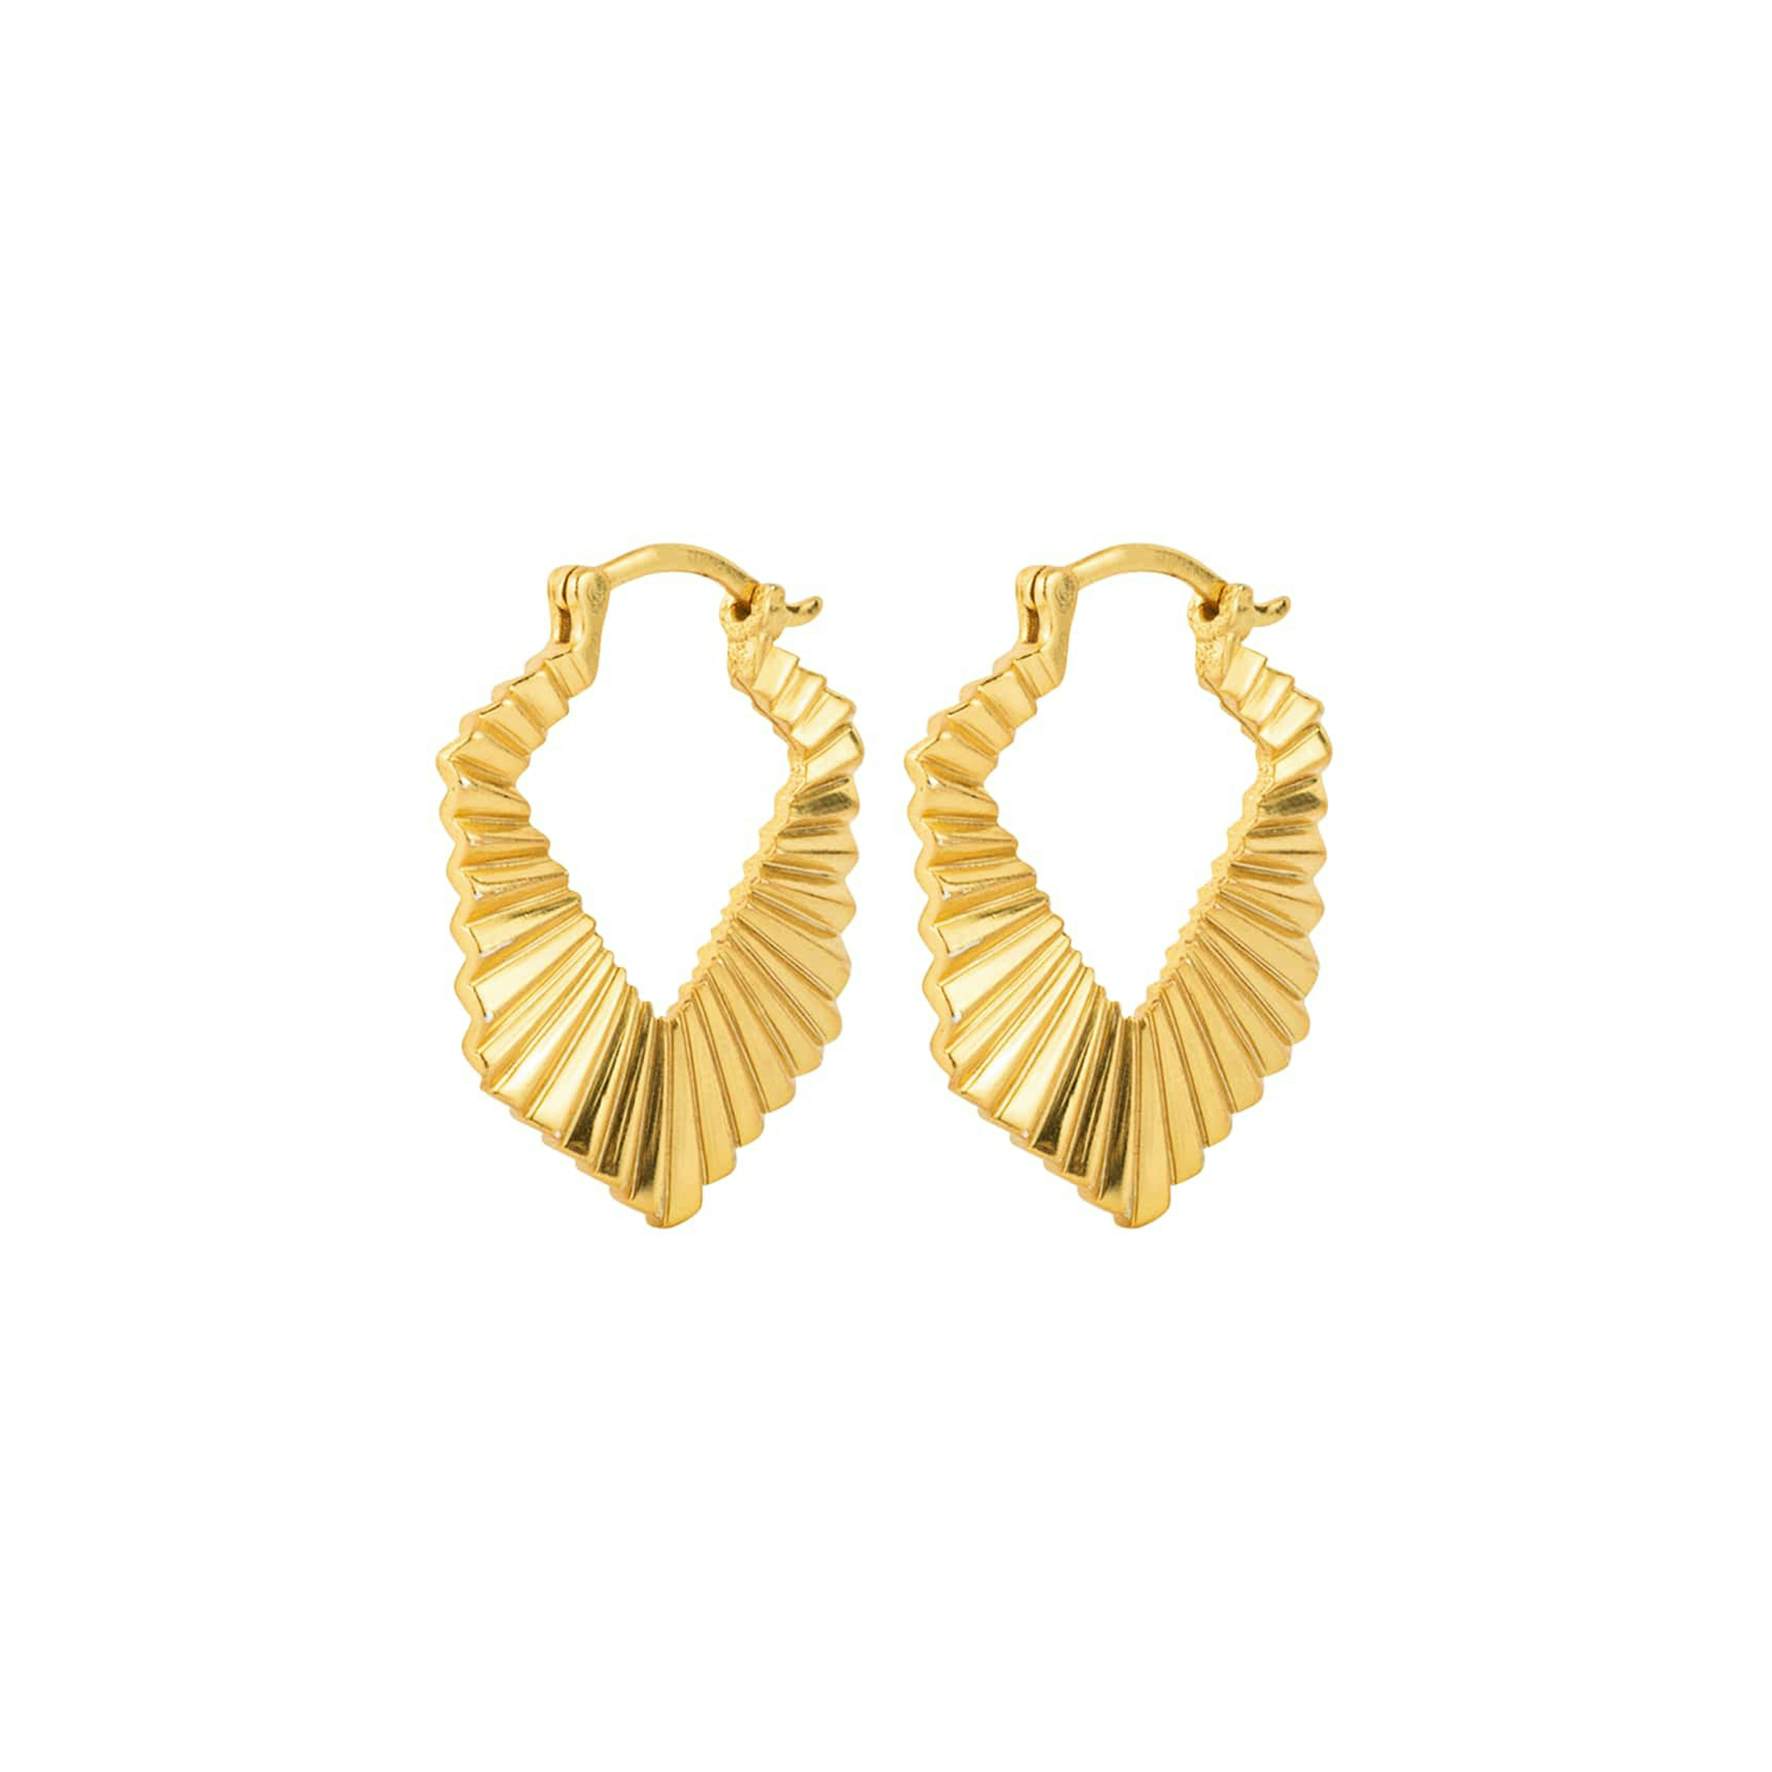 Celestial Horizon Earrings from House Of Vincent in Goldplated-Silver Sterling 925